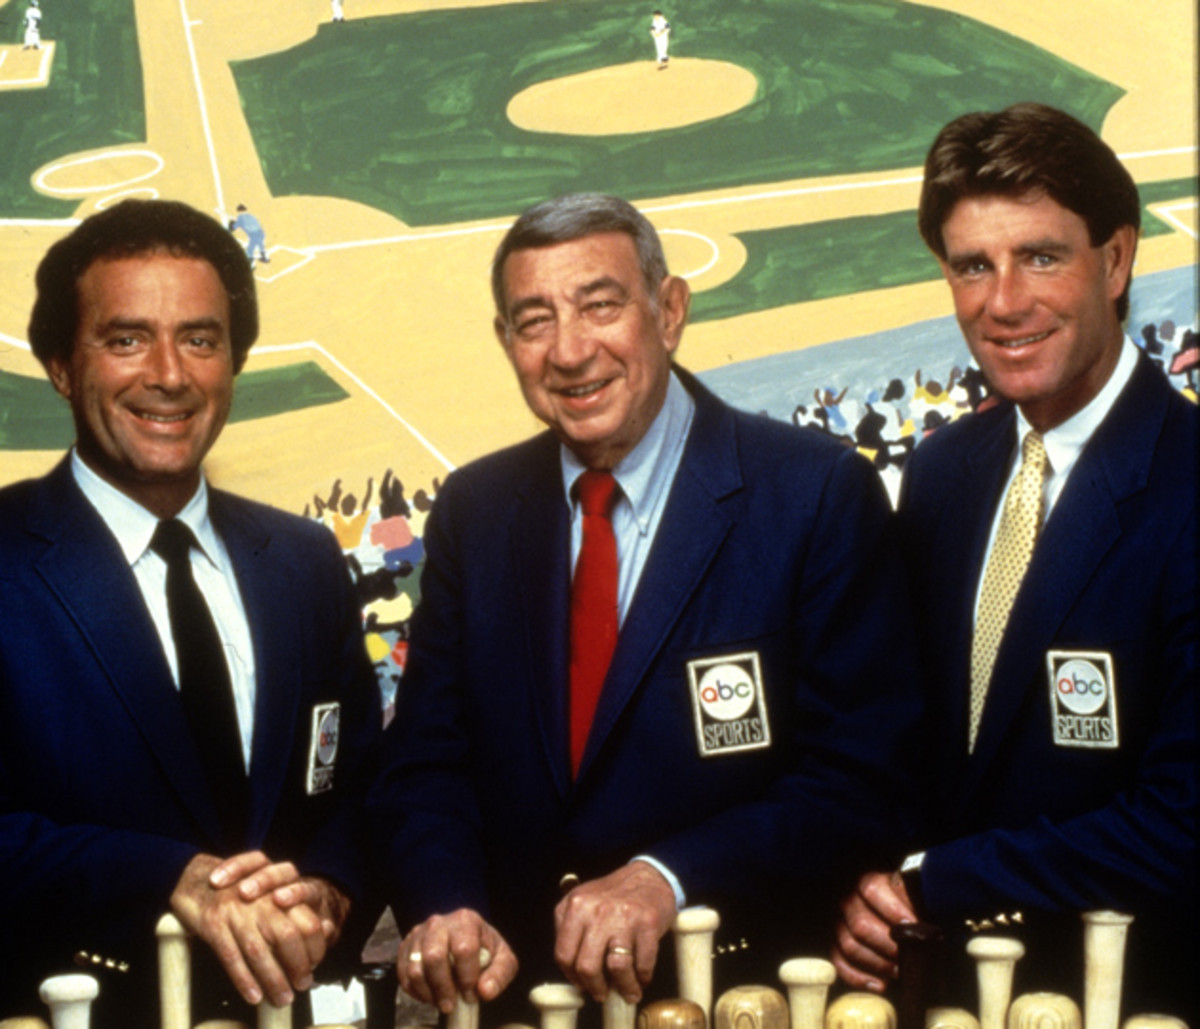 From left to right: Al Michaels, Howard Cosell and Hall of Fame pitcher Jim Palmer.